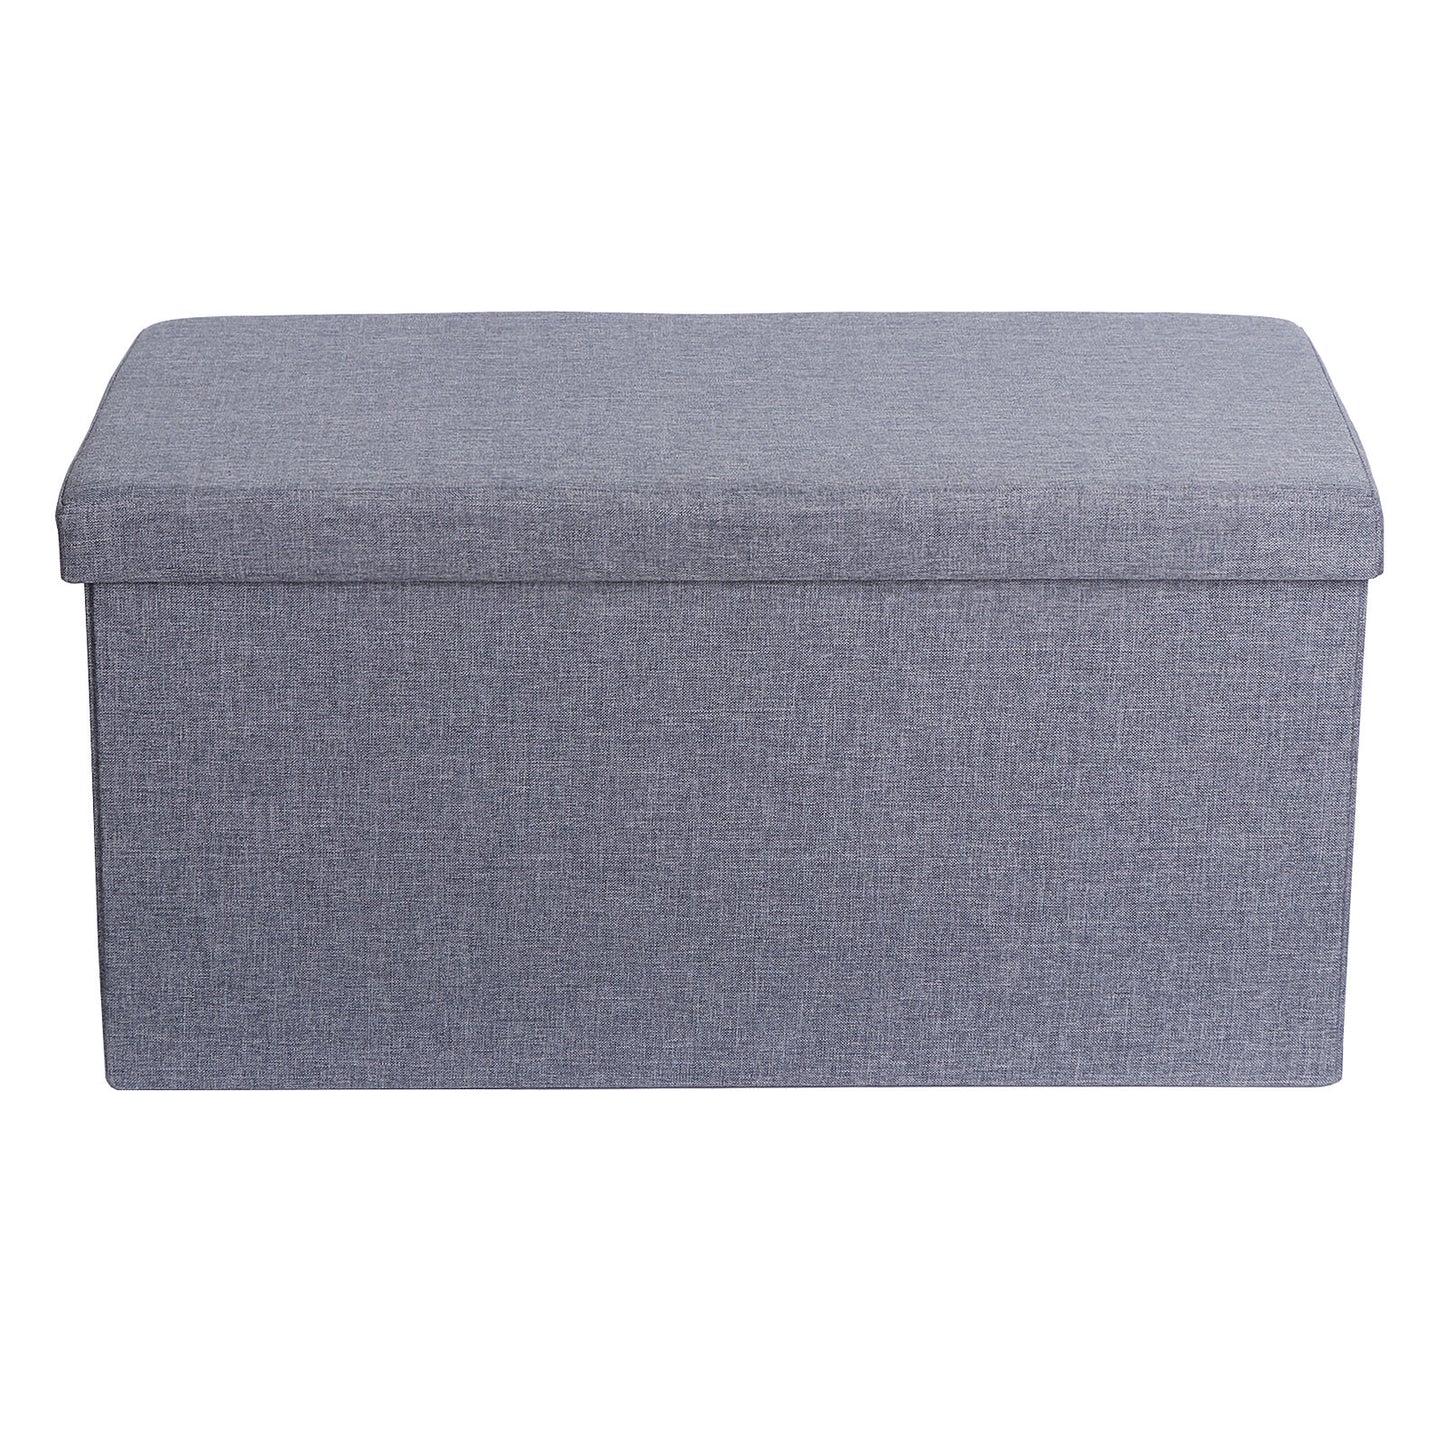 30 Inches Folding Storage Ottoman Bench Storage Chest Foot Rest Stool Bedroom